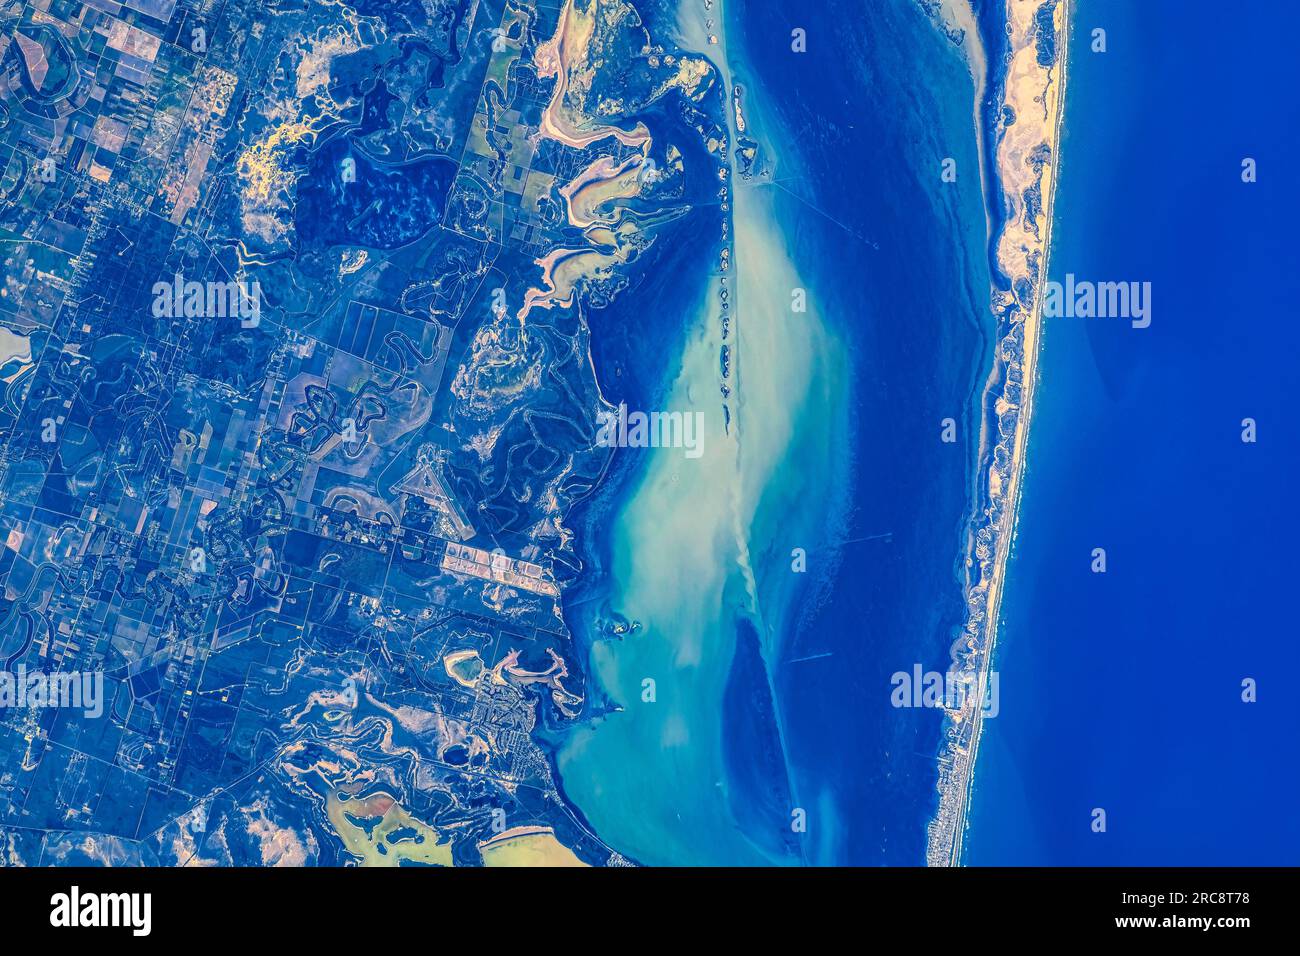 Coastal feature of the South Padre Island, USA. Image by NASA. Media usage guidelines: https://www.nasa.gov/multimedia/guidelines/index.html Stock Photo